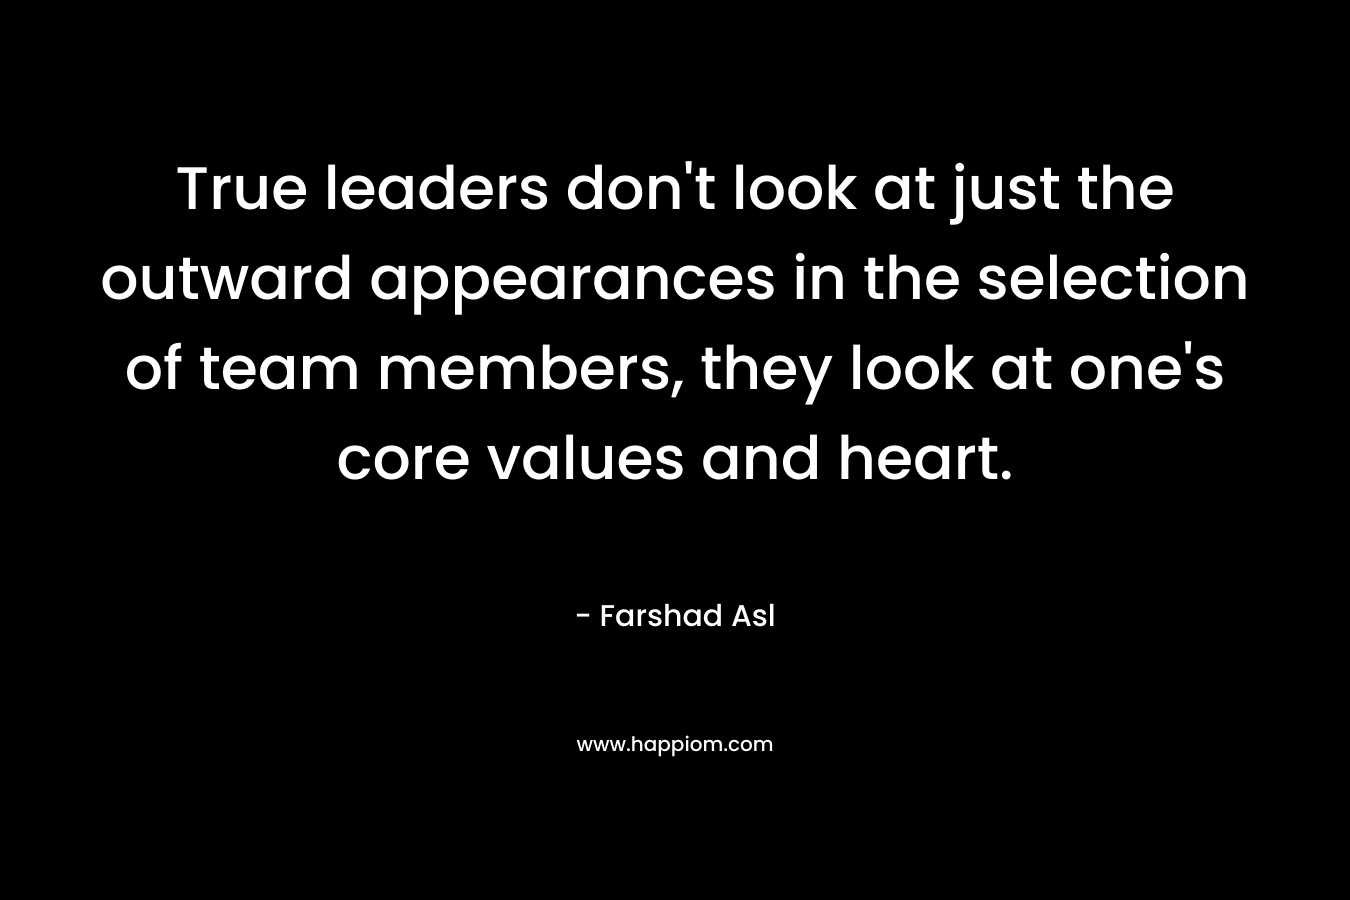 True leaders don’t look at just the outward appearances in the selection of team members, they look at one’s core values and heart. – Farshad Asl